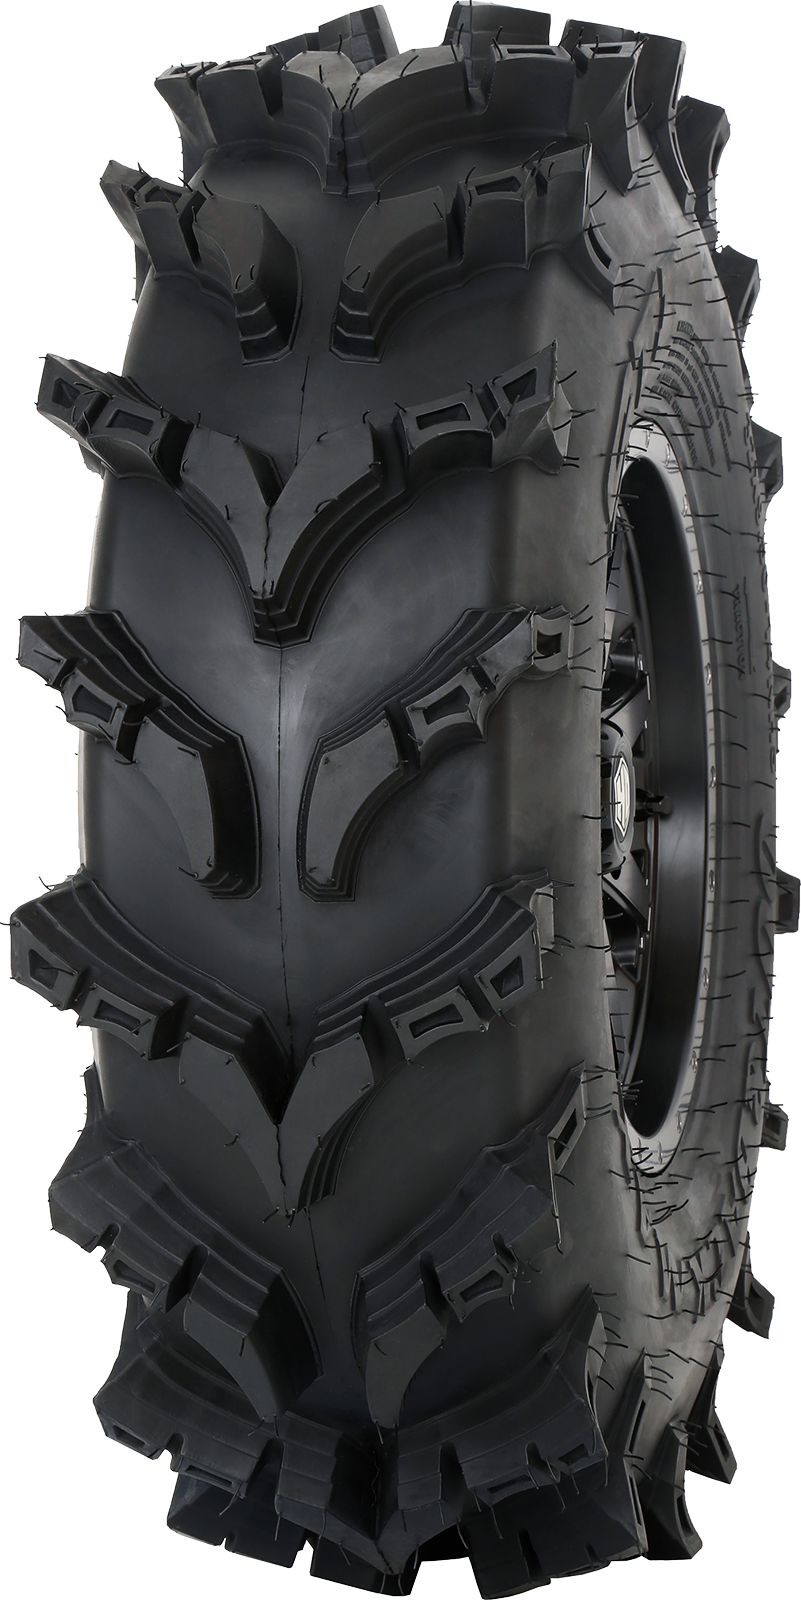 STI TIRE & WHEEL Tire - Out & Back Max - Front/Rear - 28x10-14 - 8 Ply 001-1325